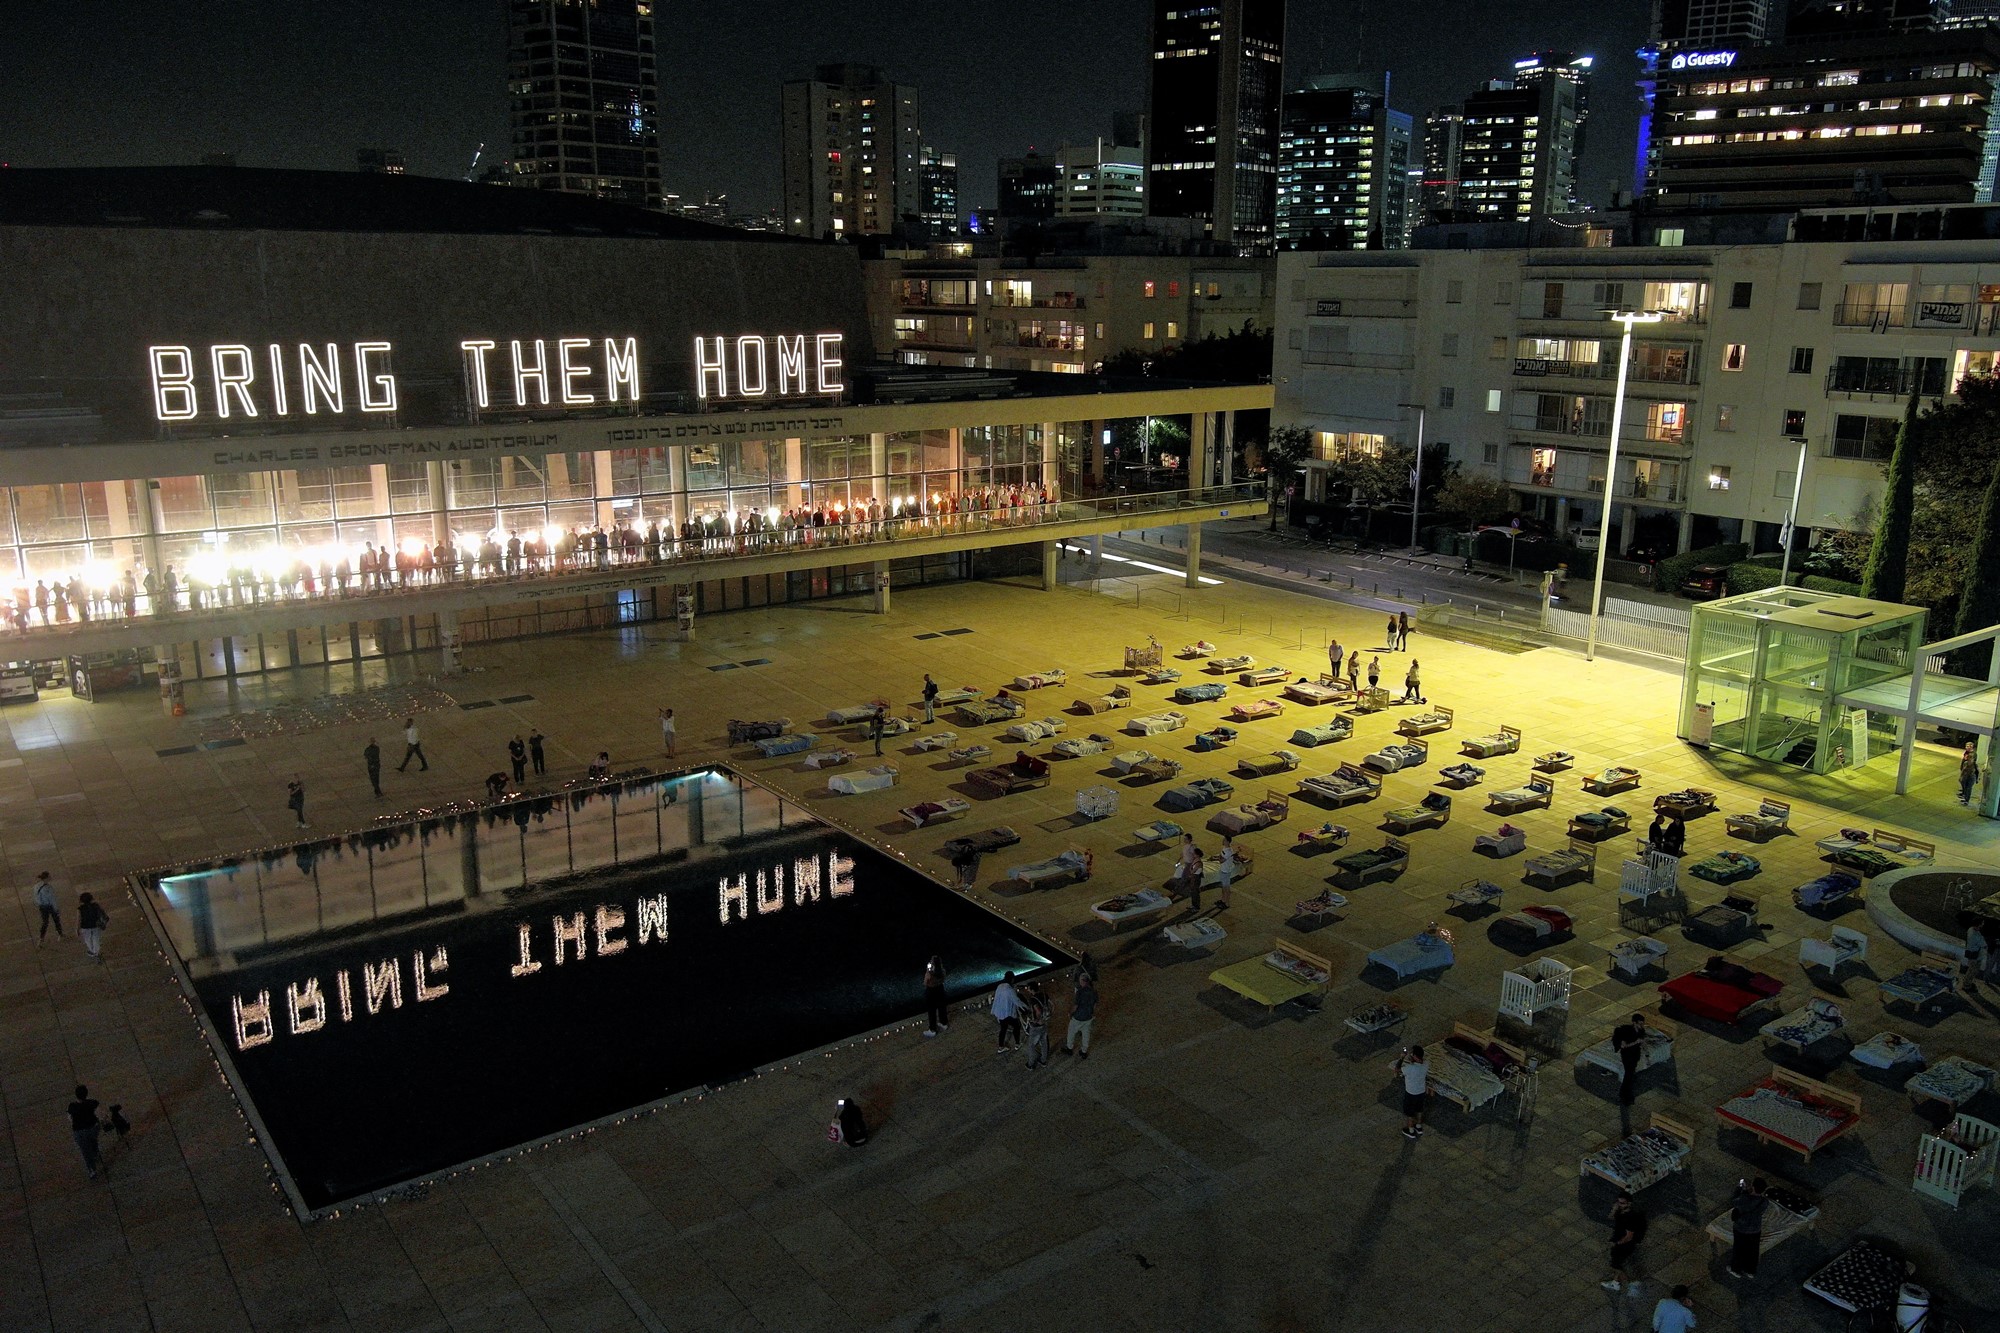 A high up view of beds displayed on a square with illuminated letters saying 'bring them home'